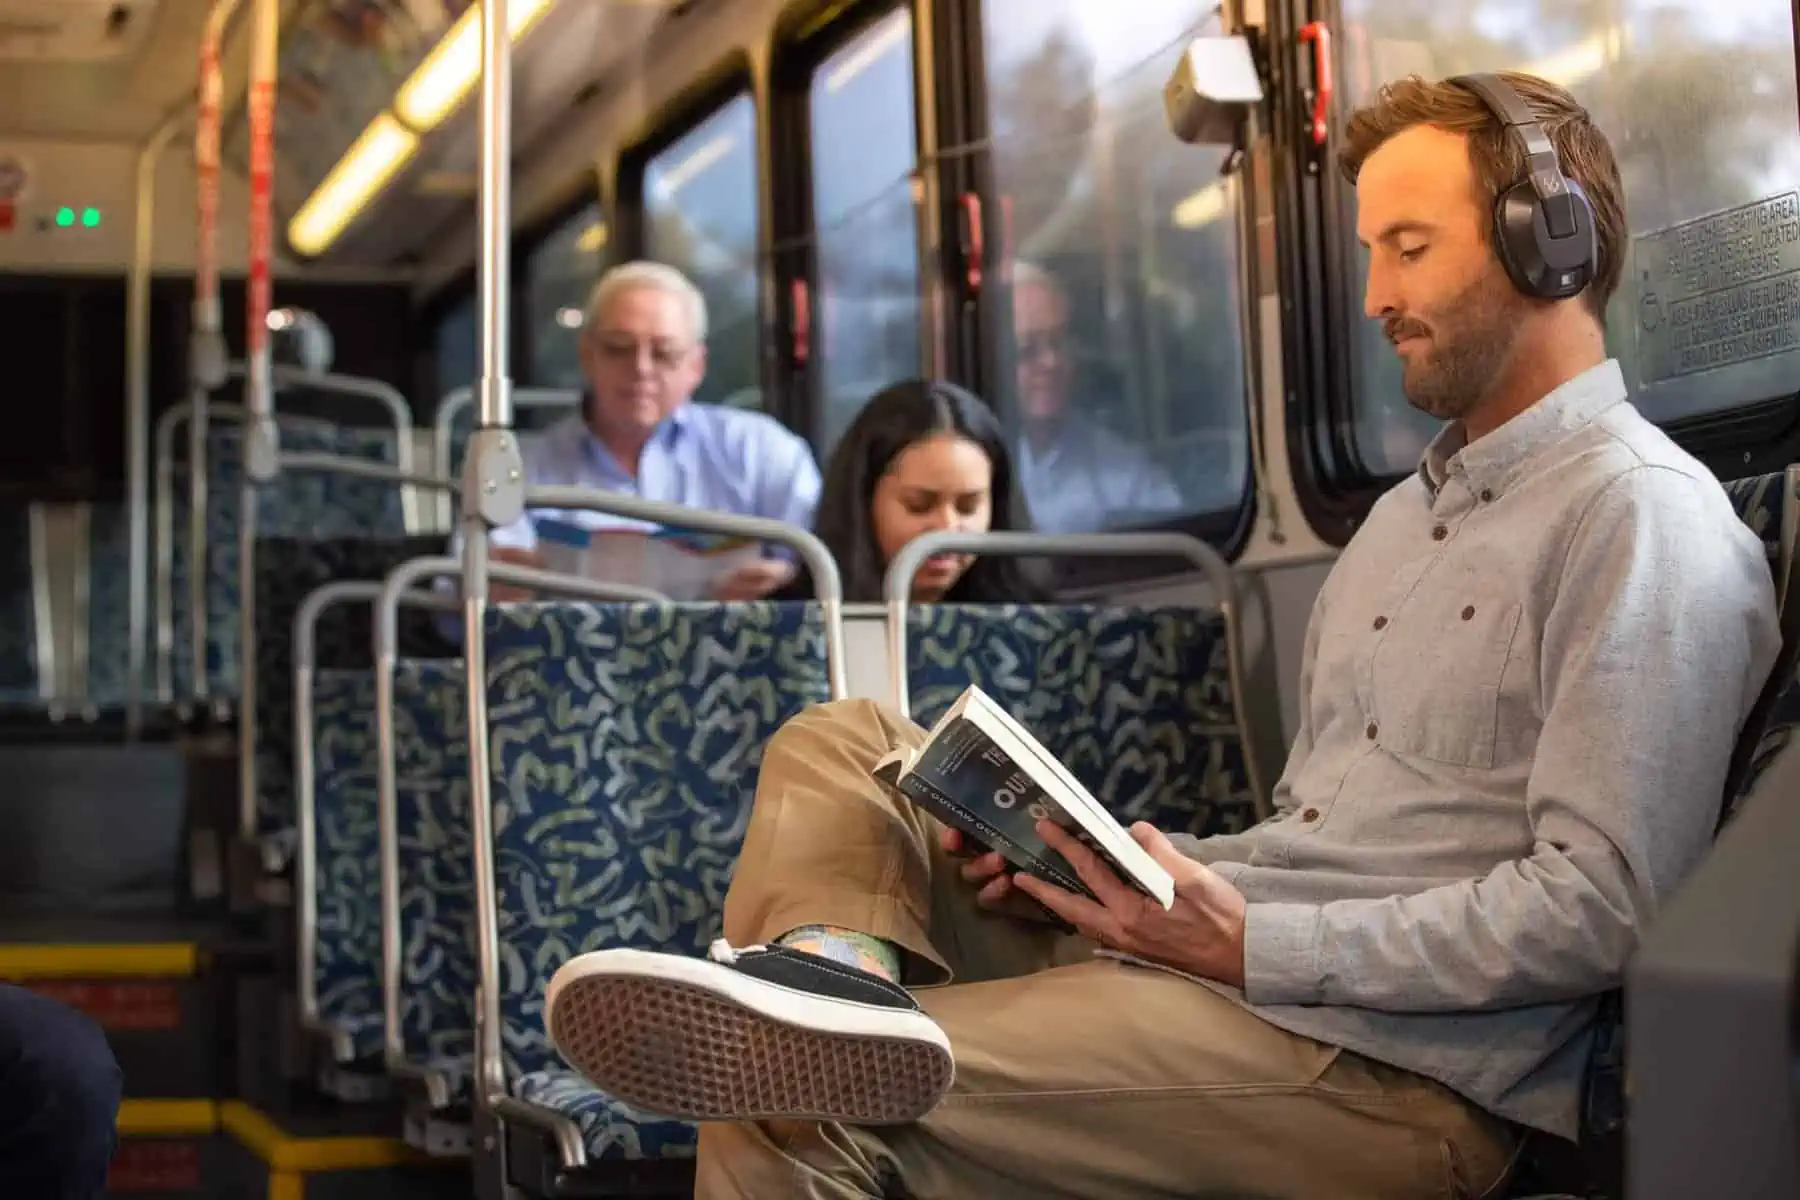 Man on bus sitting with book and headphones legs crossed with two others warm color